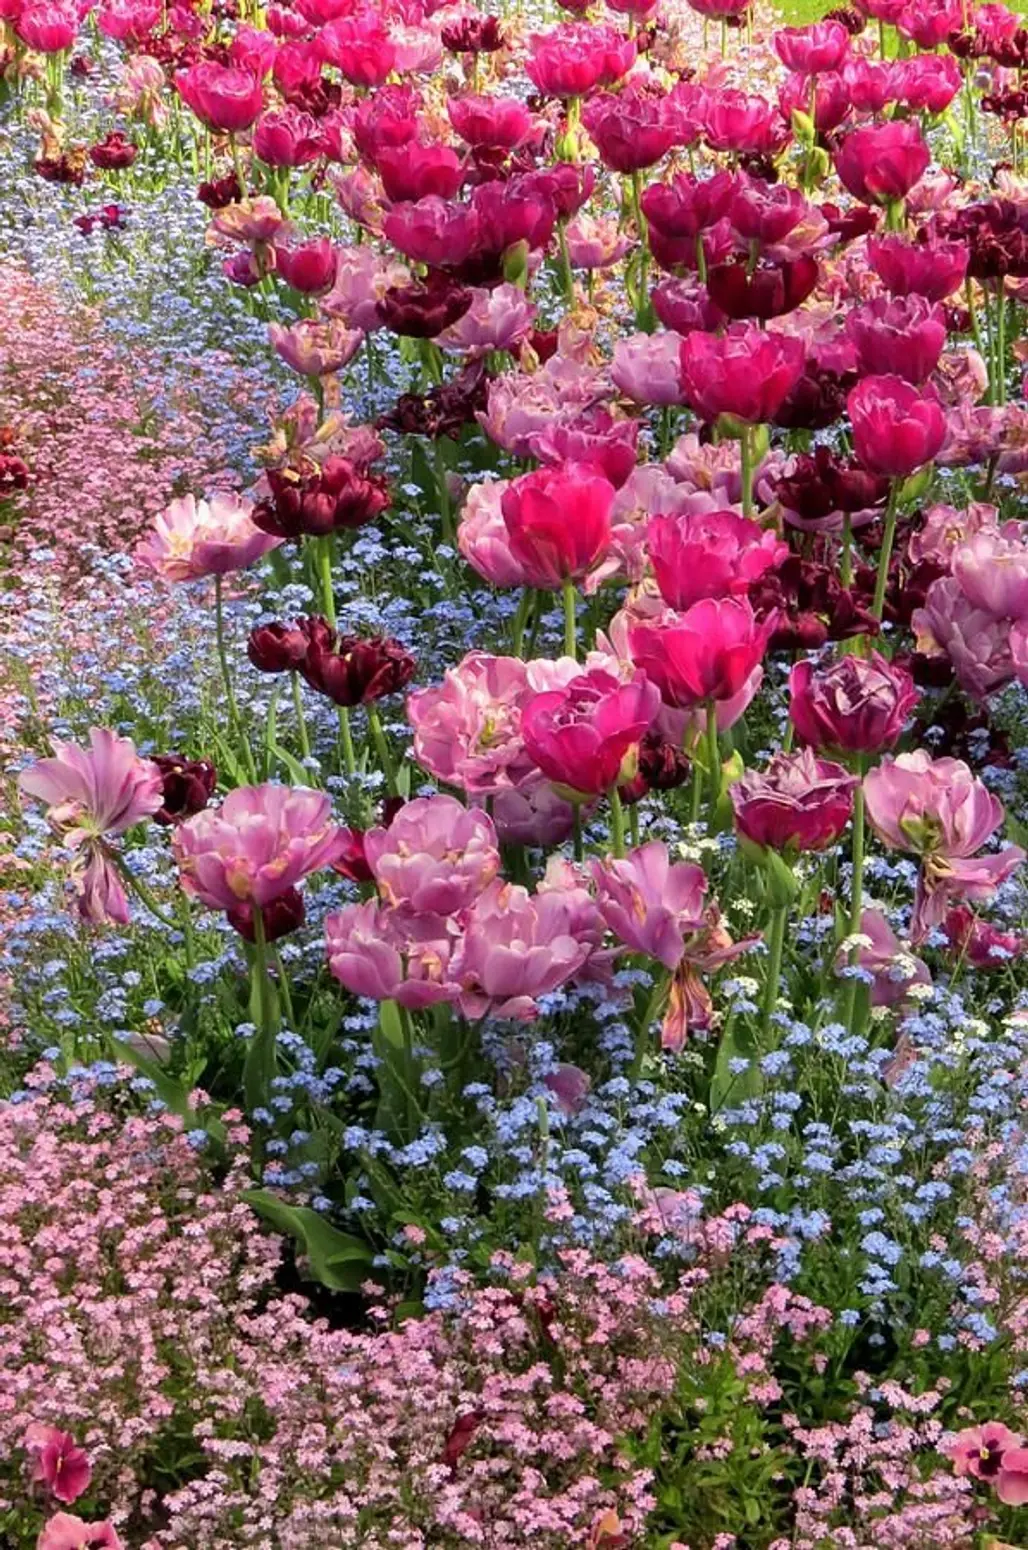 Tulips and Forget-me-nots